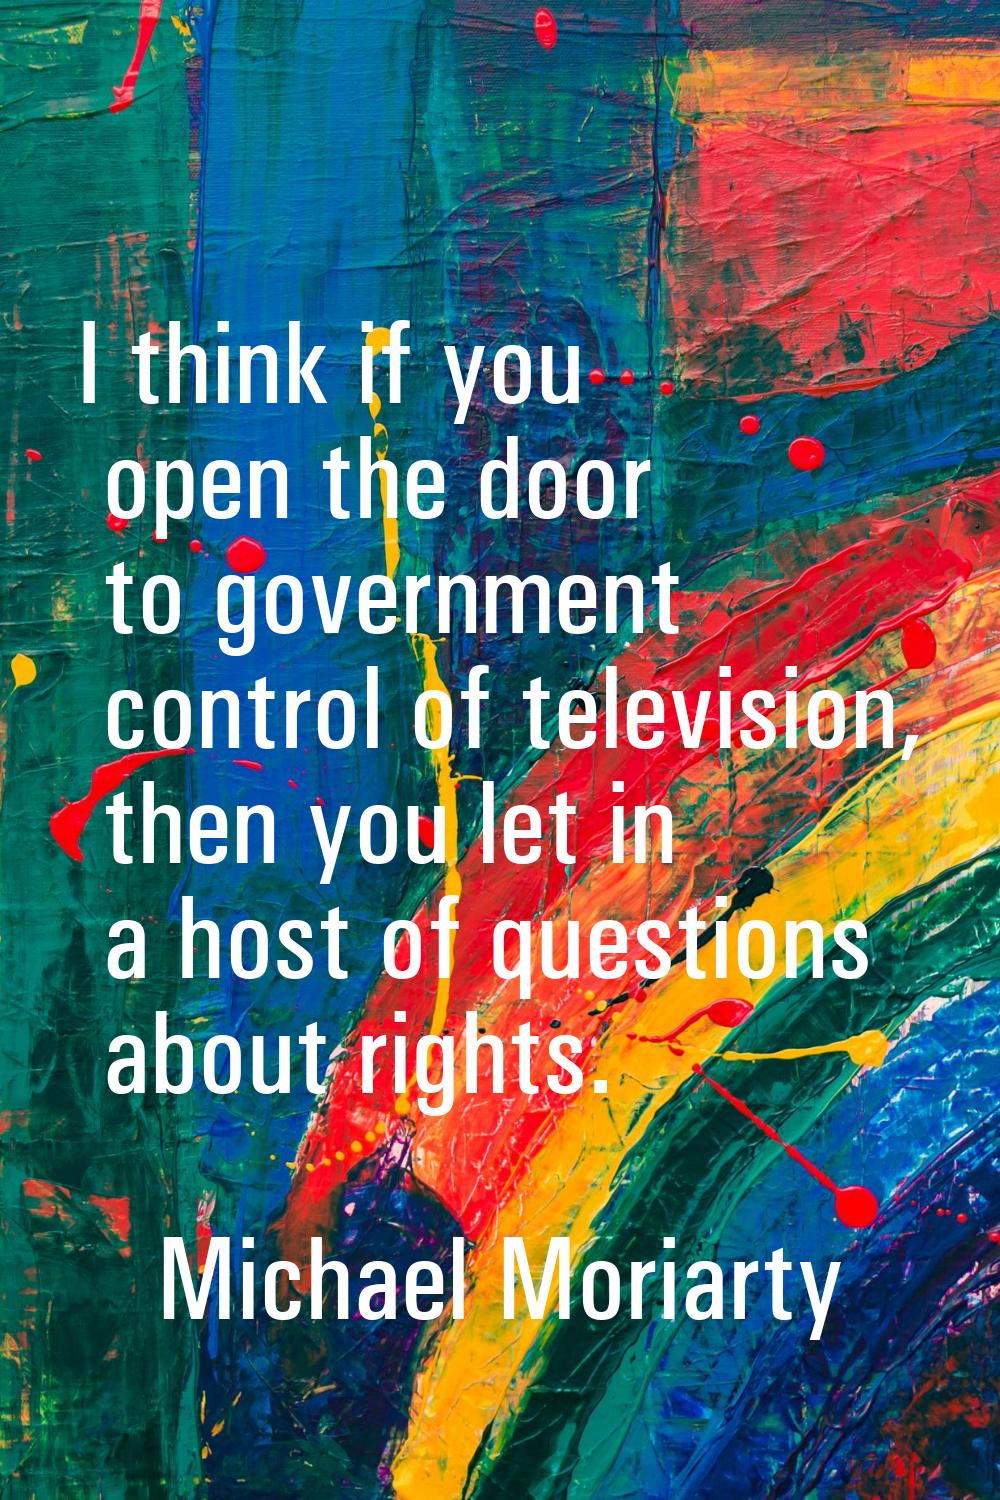 I think if you open the door to government control of television, then you let in a host of questio